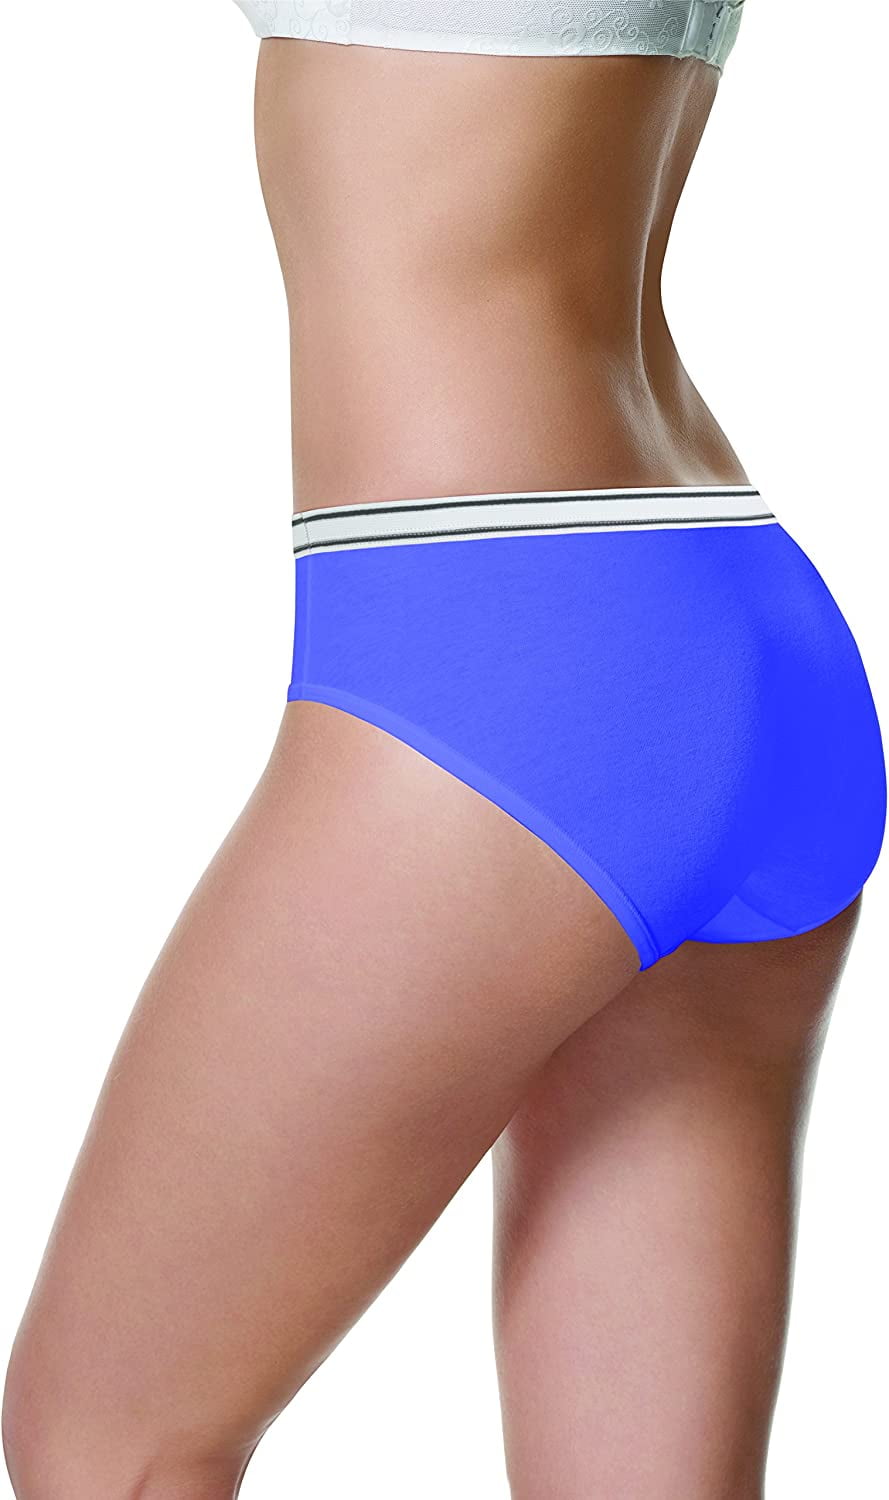 Hanes Women's 10pk Cotton Hi-cut Briefs - Colors And Pattern May Vary 6 :  Target